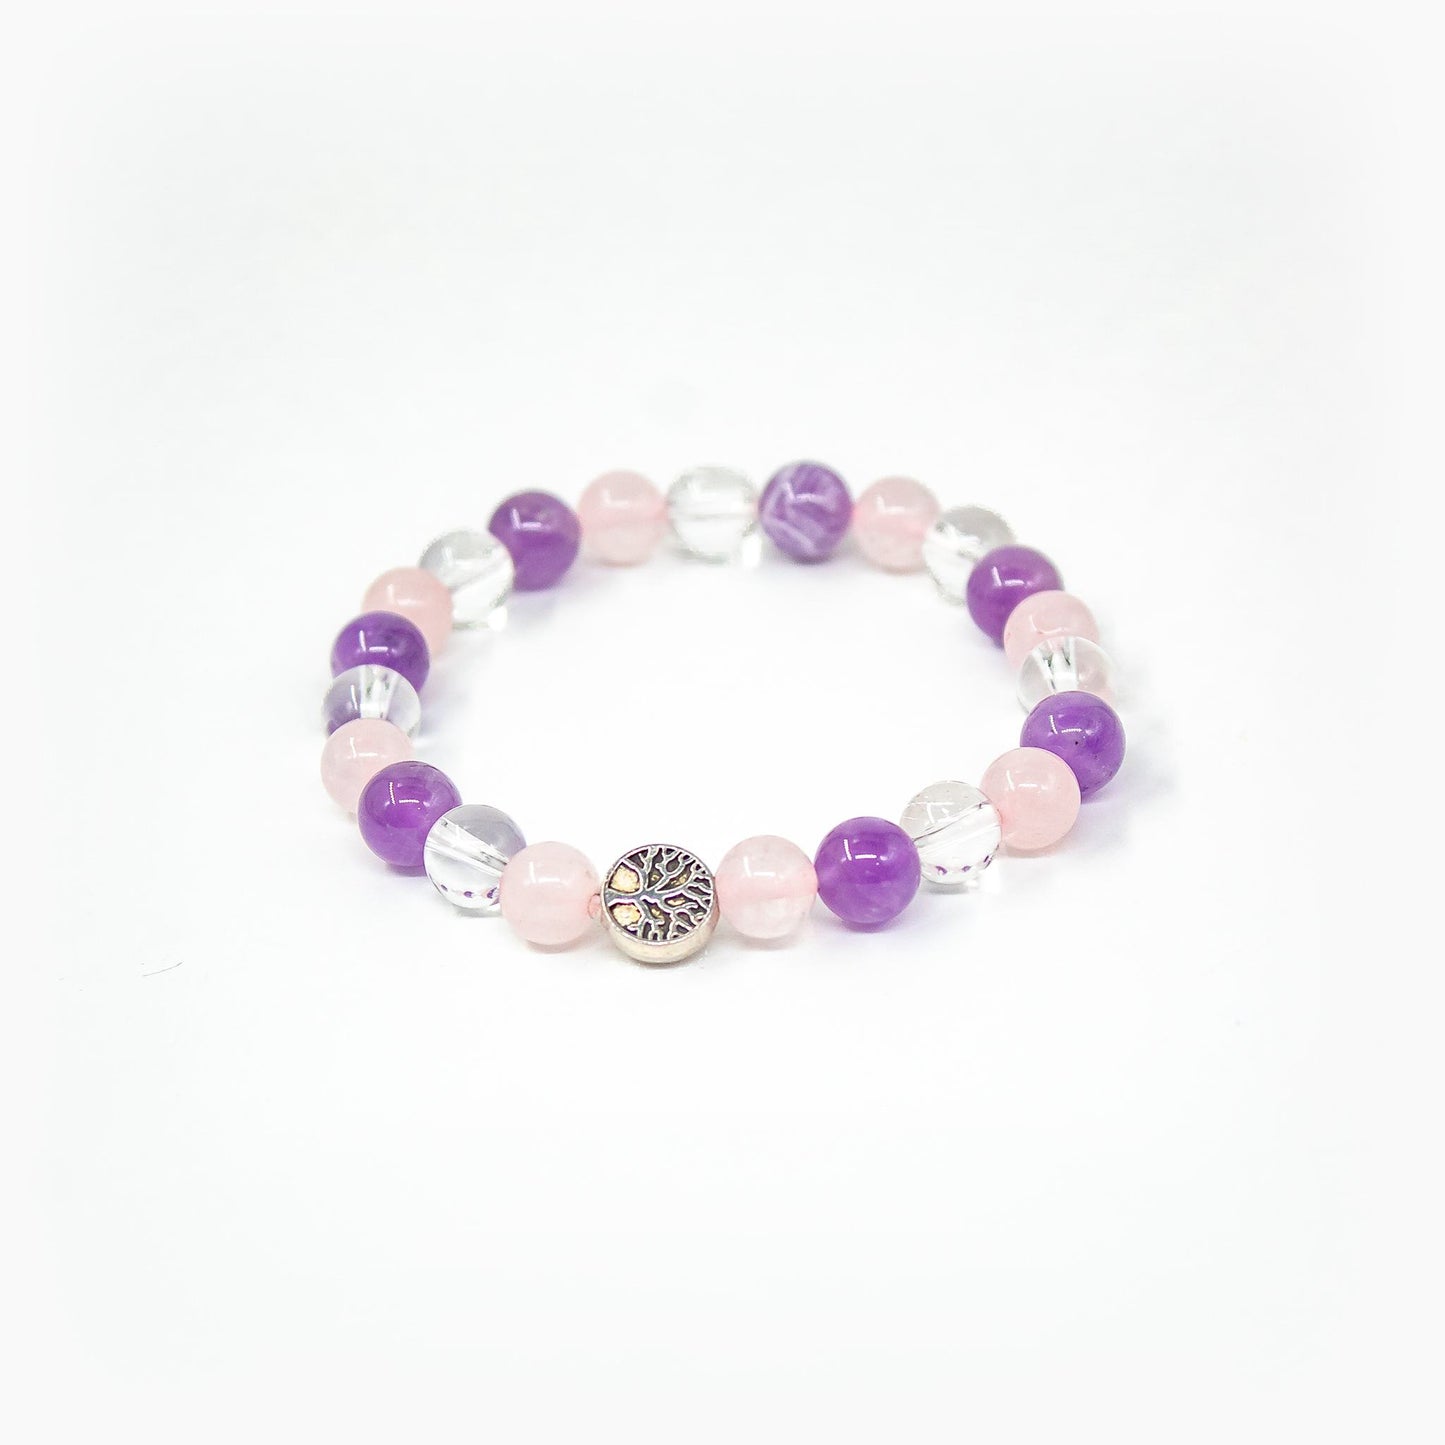 amethyst, rose quartz and clear quartz with tree of life charm